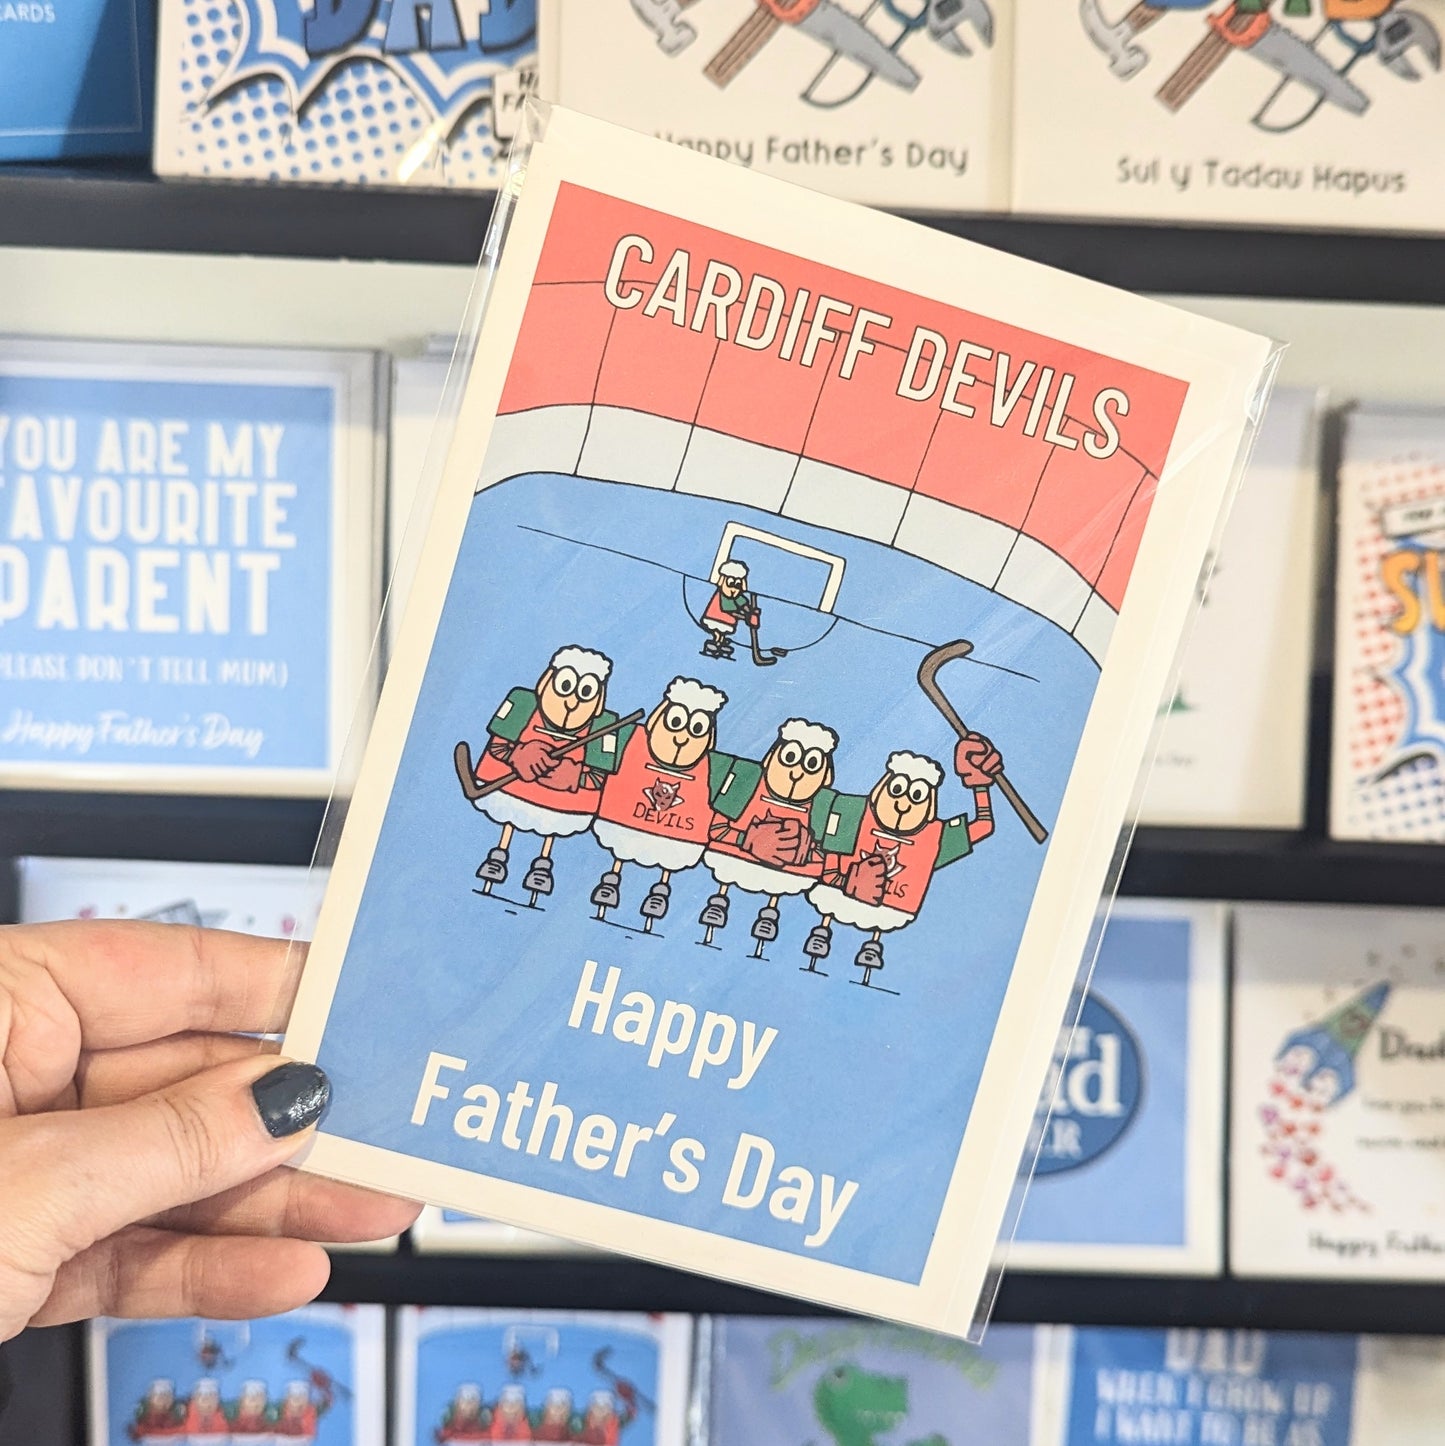 Cardiff Devils  - Fathers Day Card